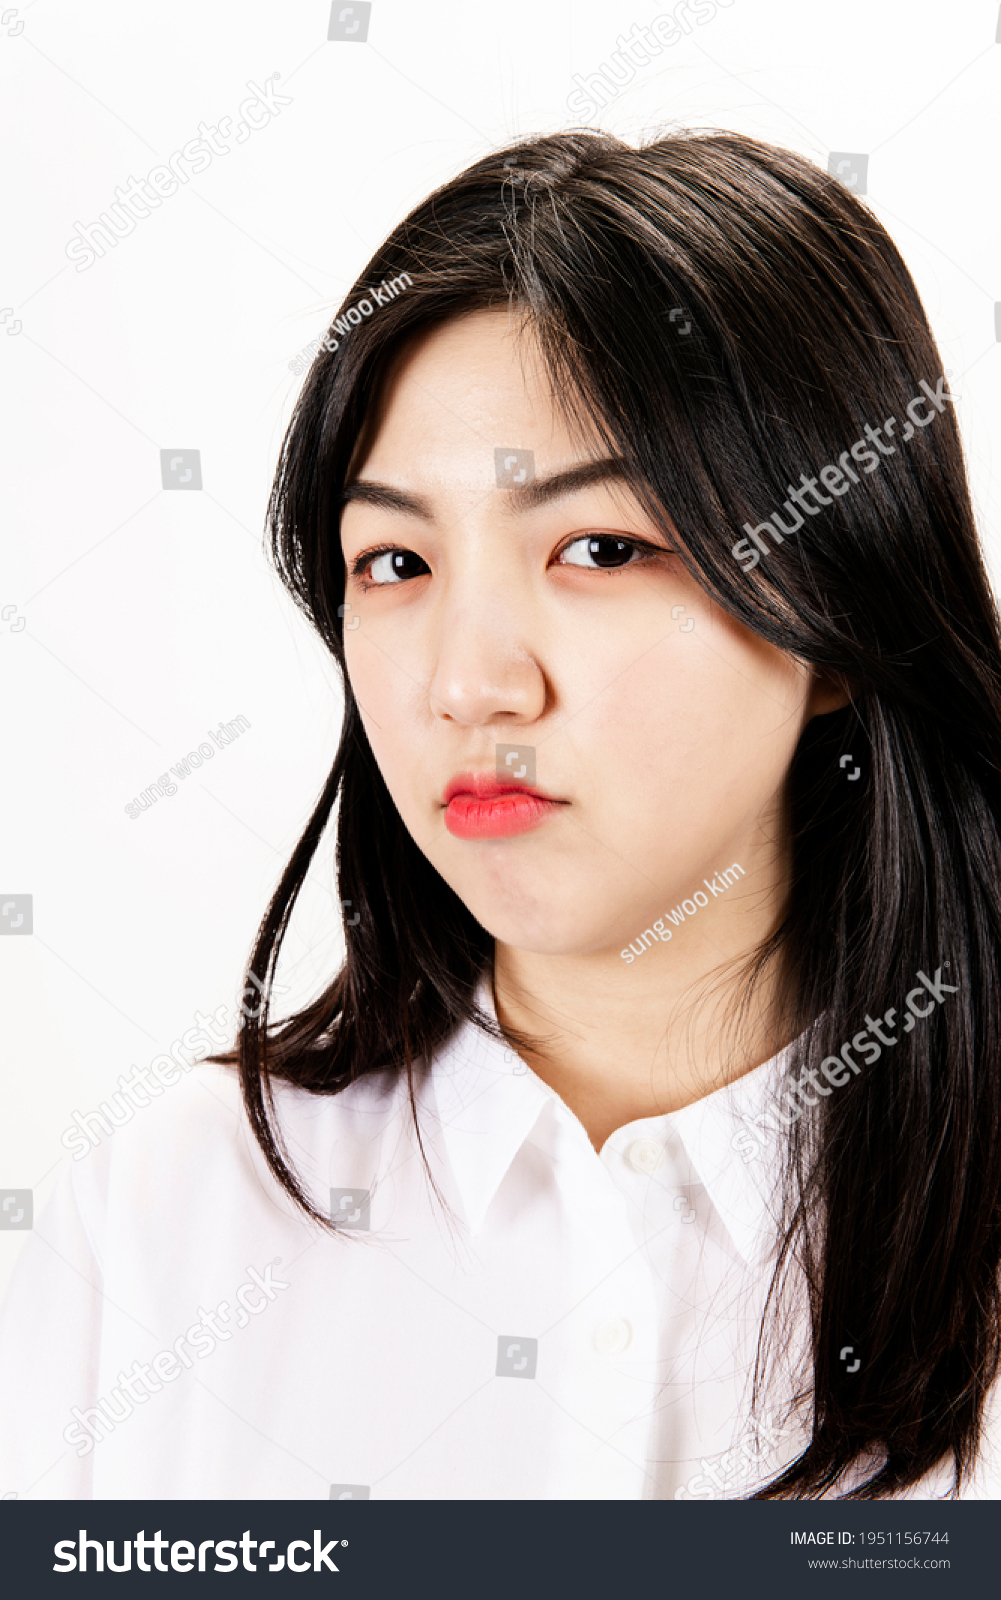 Close-up of a slightly sulky woman's face #1951156744